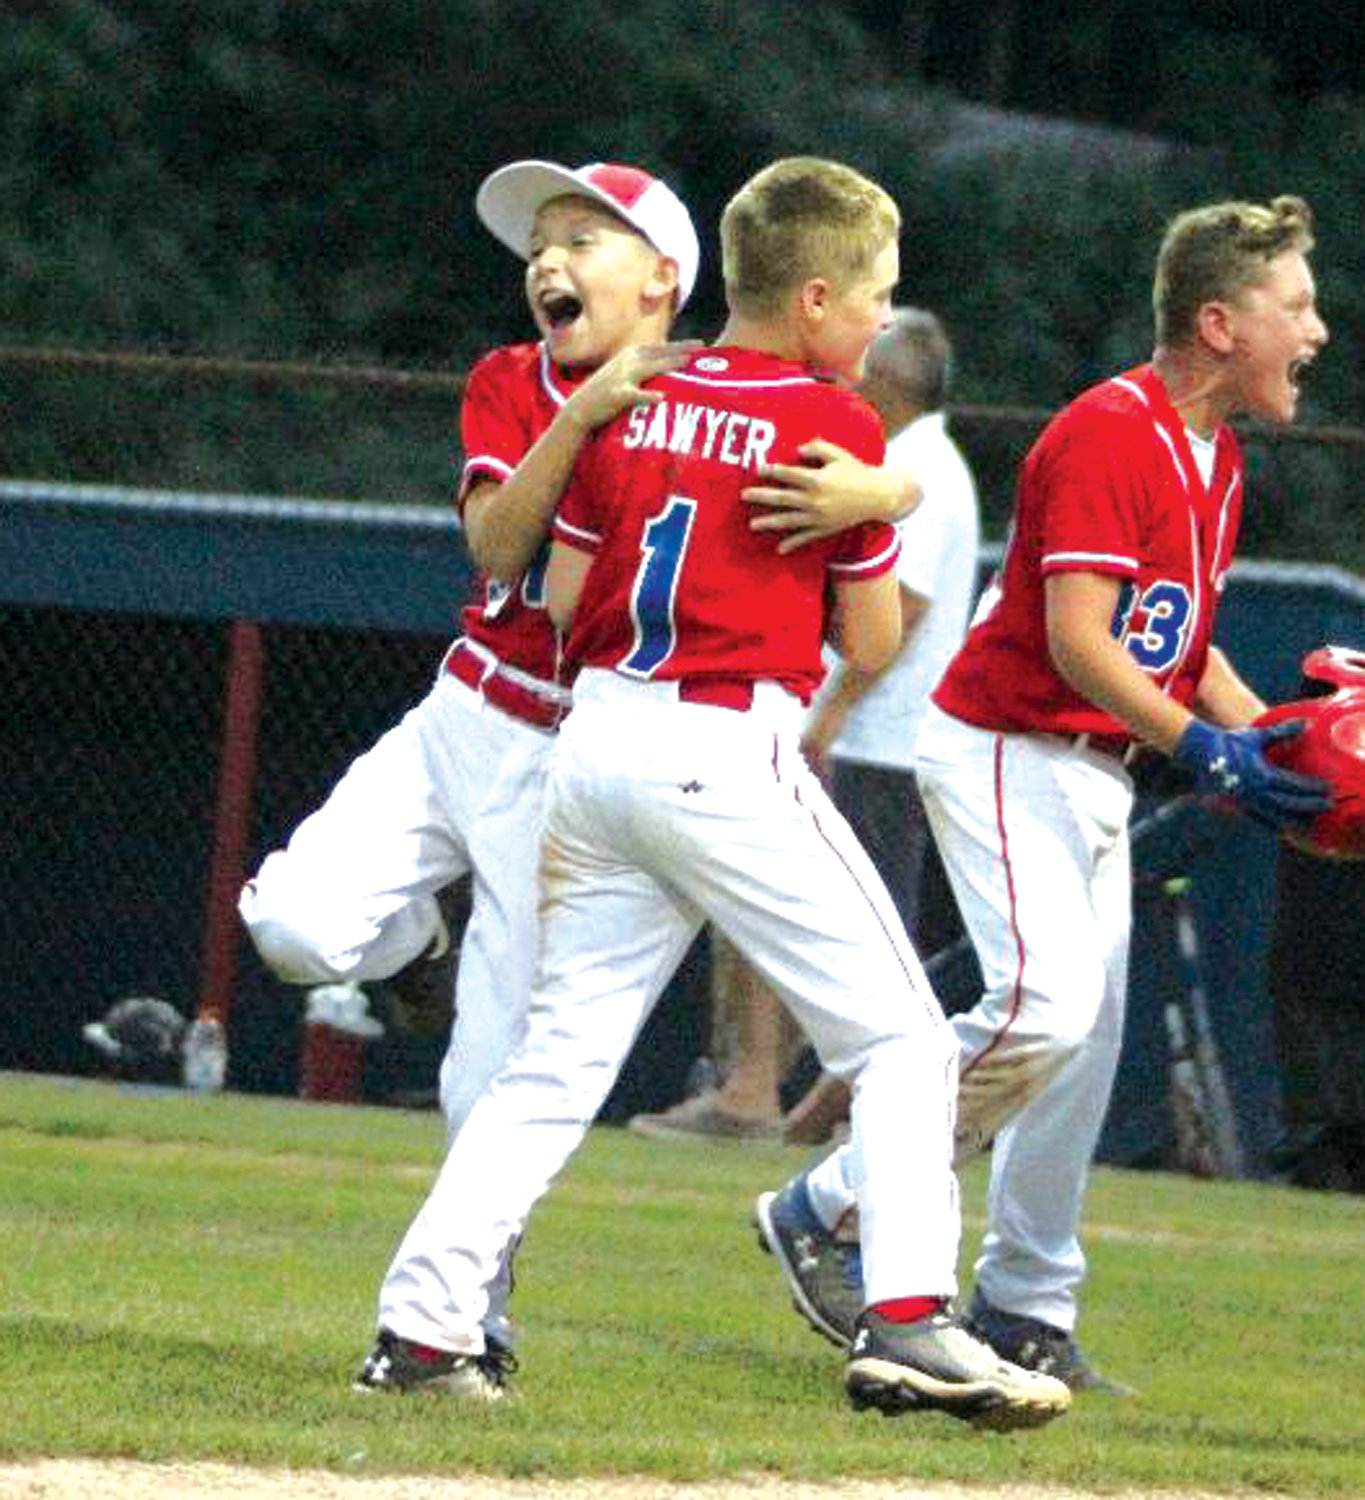 CELEBRATE GOOD TIMES: Members of the WCA 10’s celebrate after winning the District 3 title.